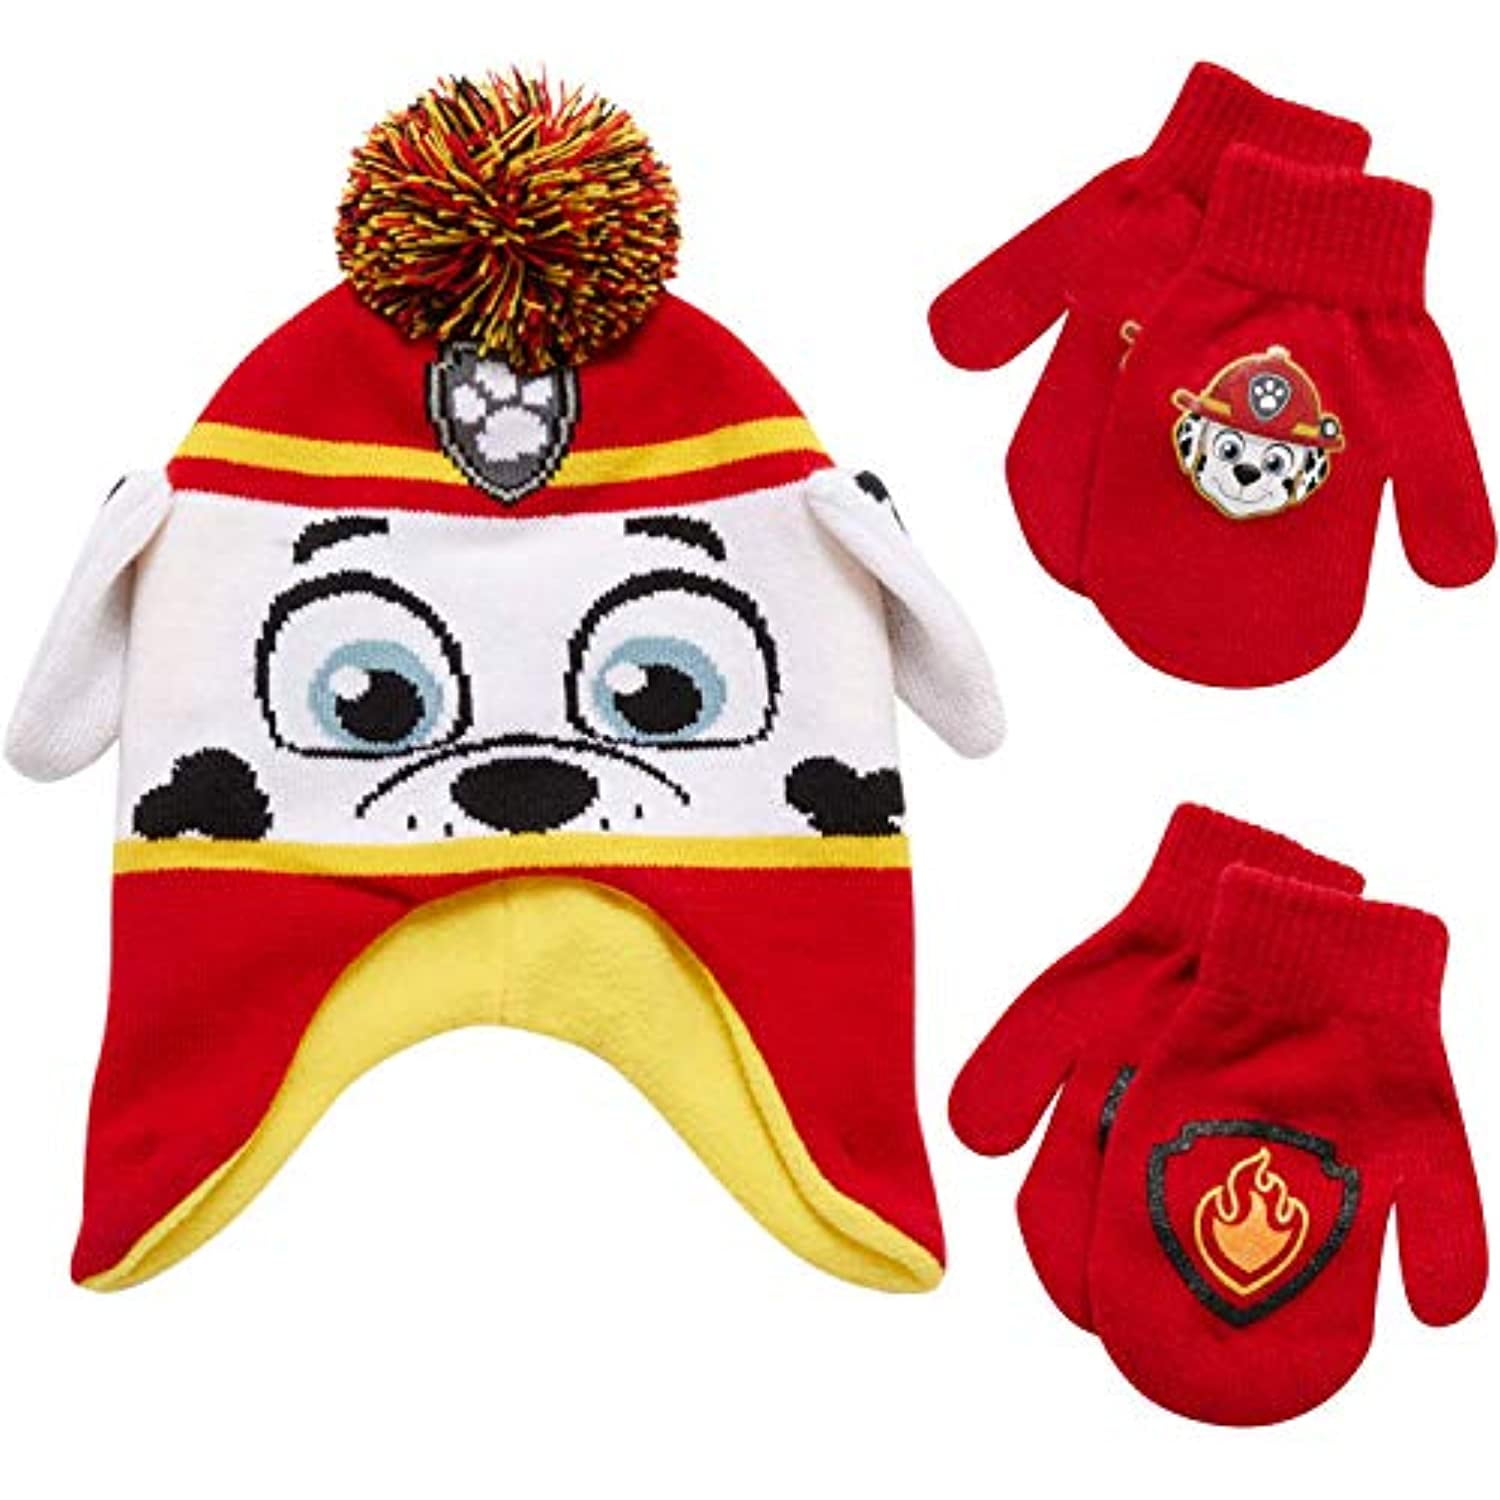 Nickelodeon Paw Patrol Toddler 2 Piece Cold Weather Hat & Mittens Winter,New,Red 